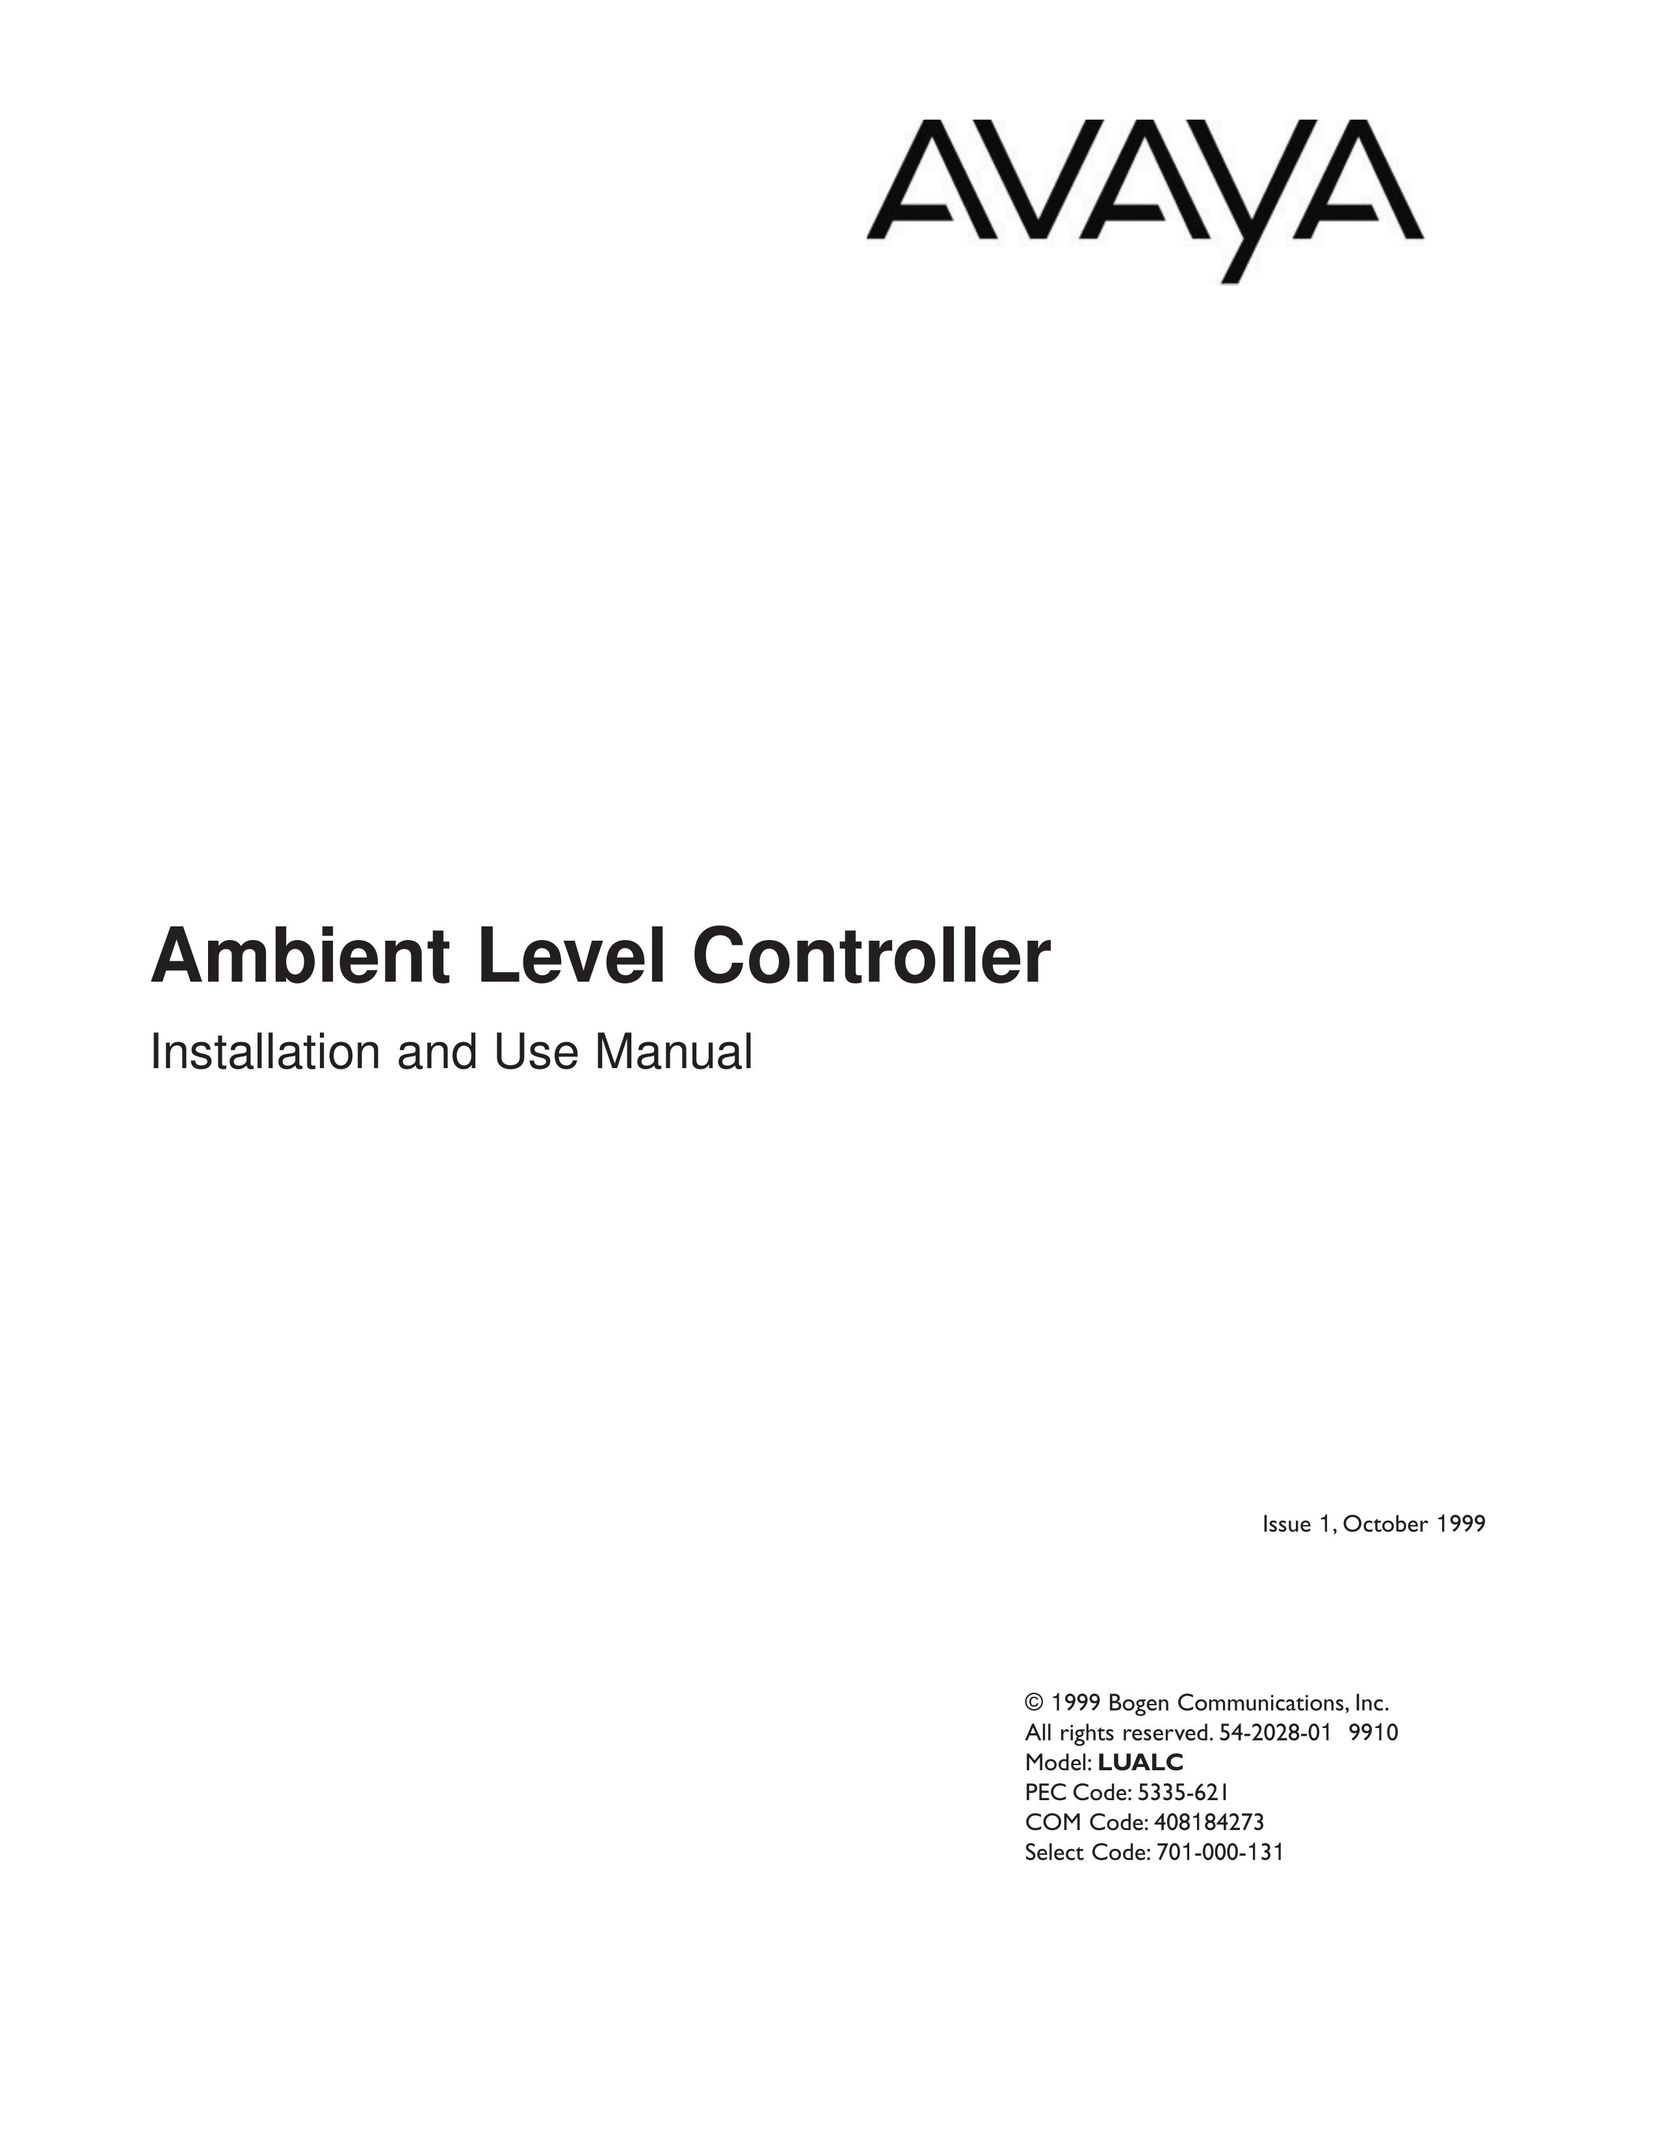 Avaya Ambient Level Controller Video Game Controller User Manual